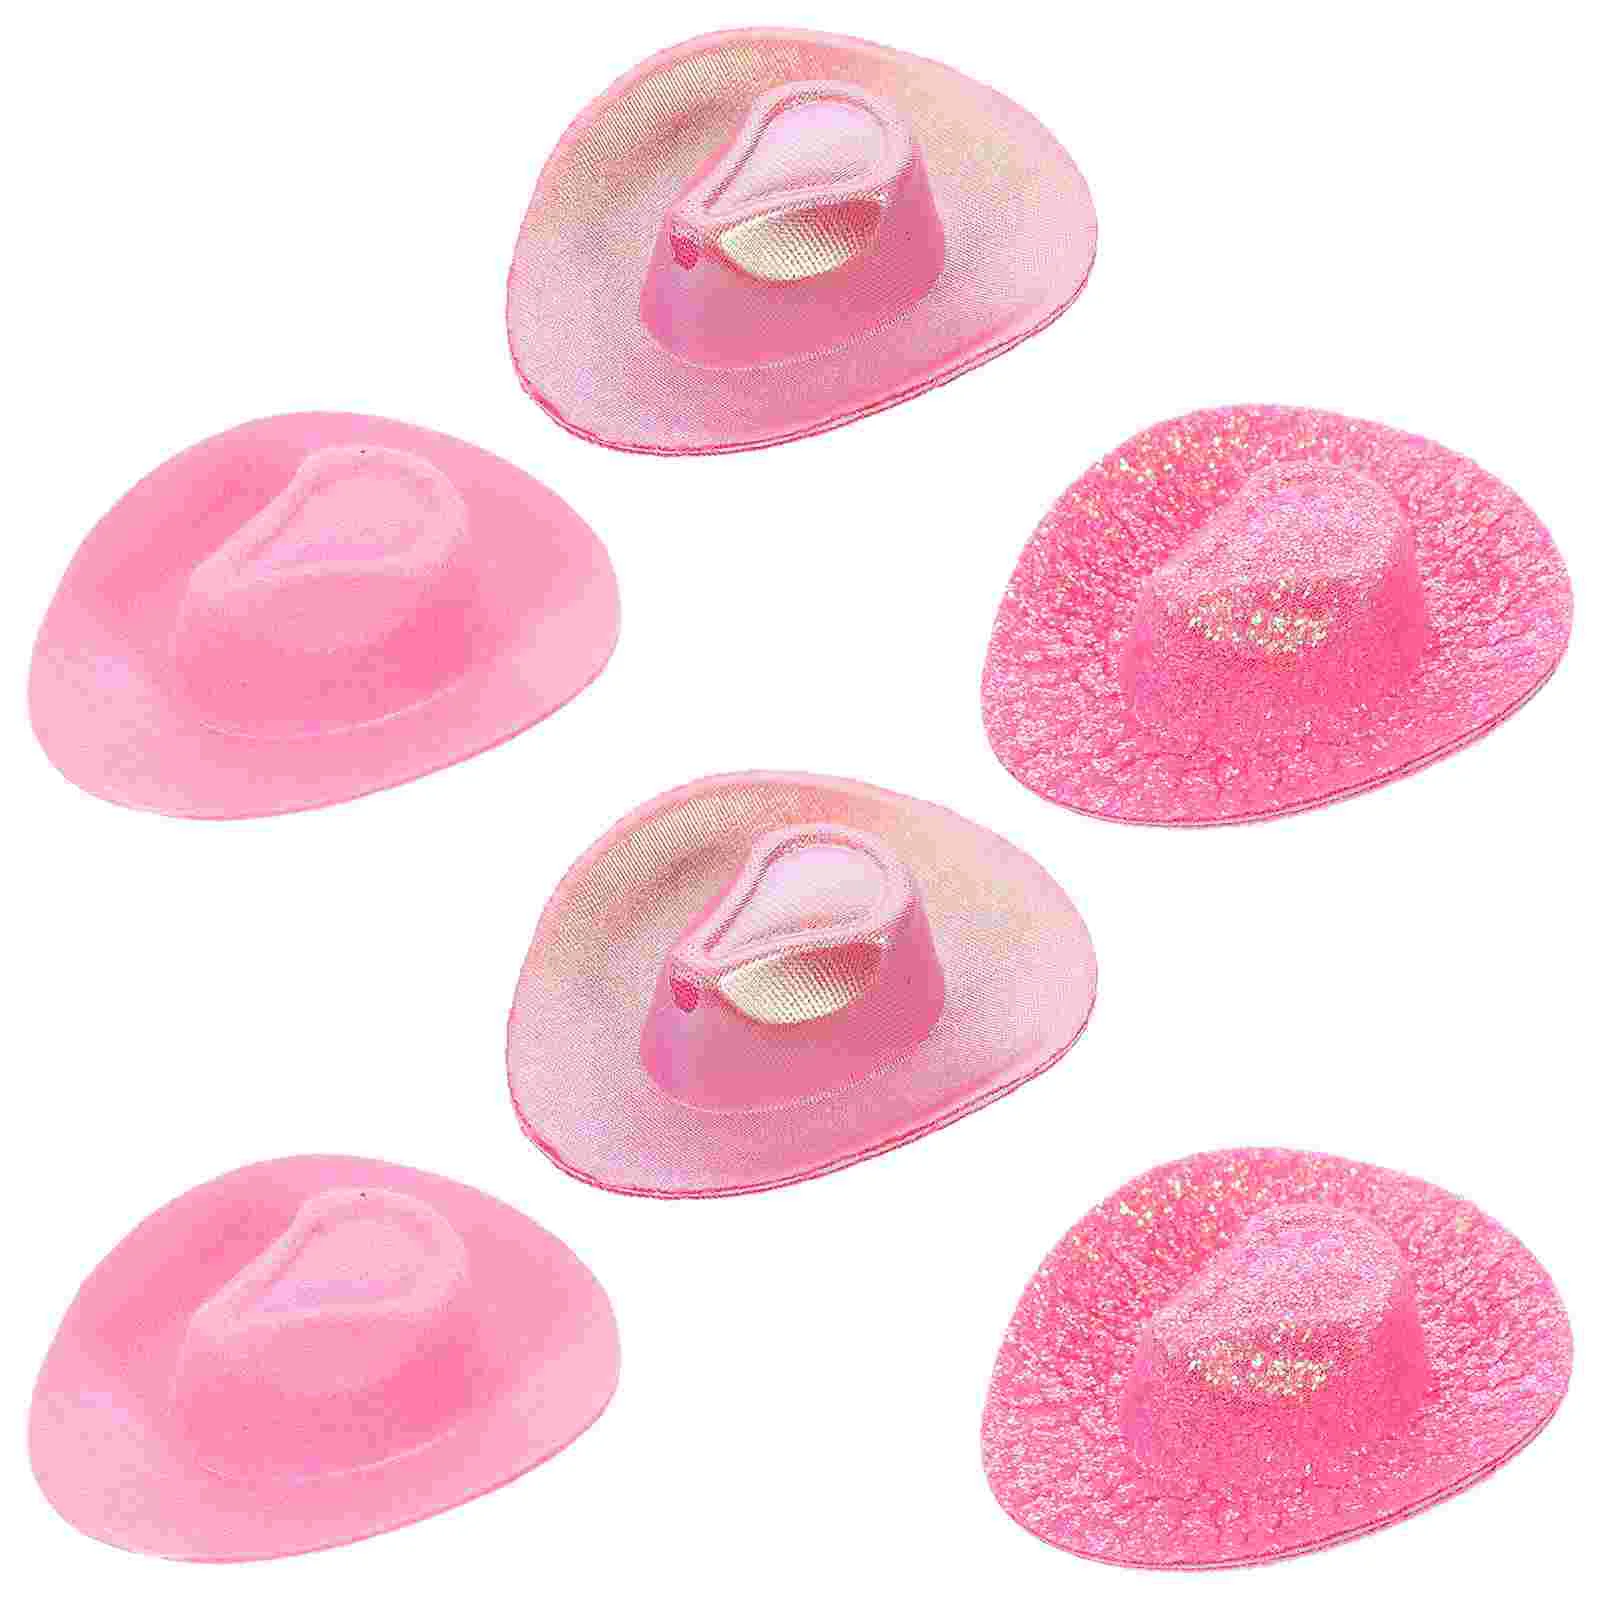 

Mini Hat Replaceable Hats Miniature Tiny Ornament Cowgirl for Drinks Small Crafts Cake Decor Boys